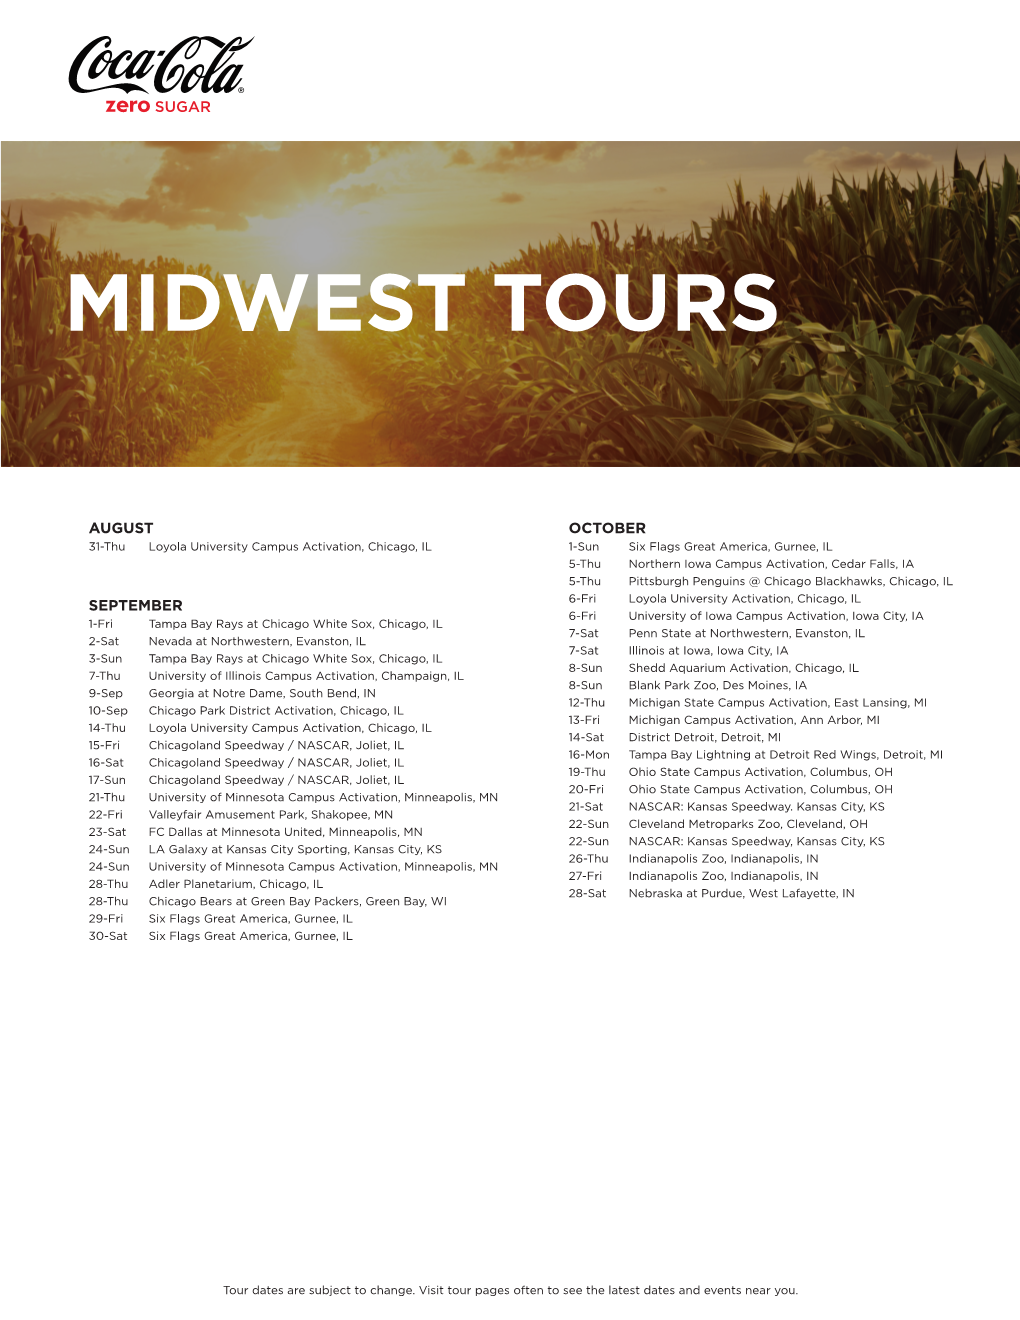 Midwest Tours